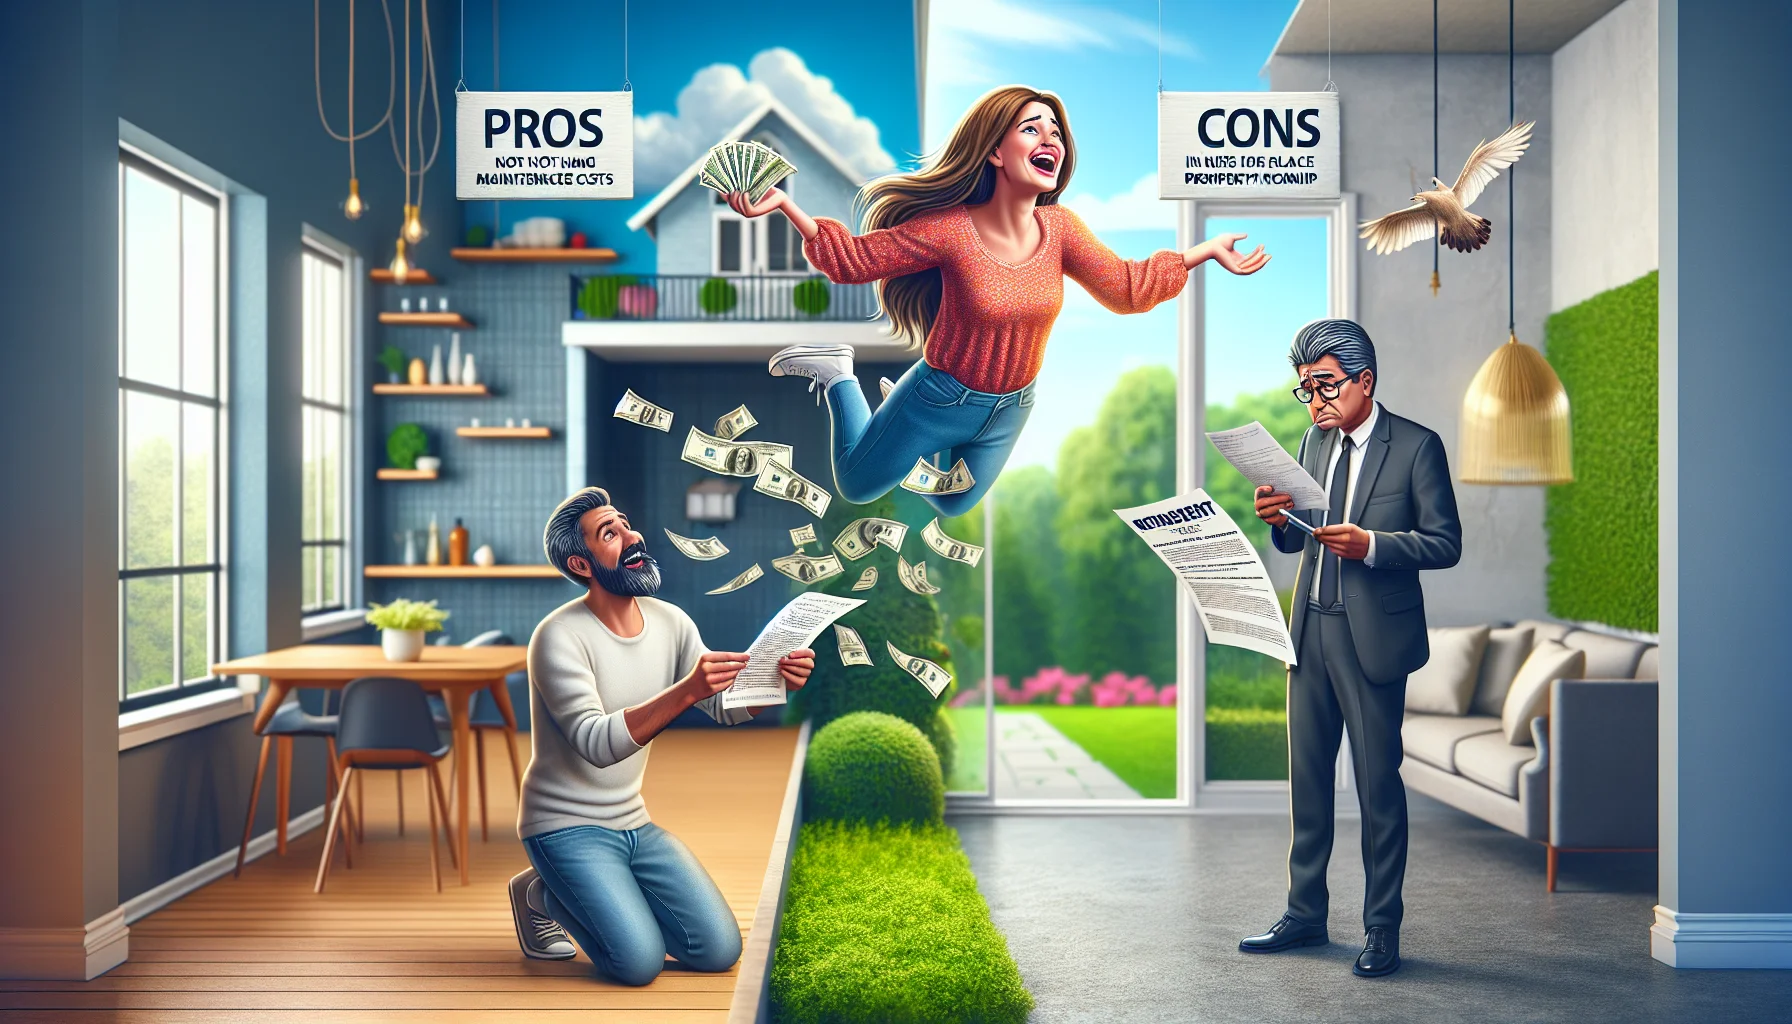 An amusing scene showcasing the advantages and disadvantages of renting a house in an ideal real estate scenario. On the left, a young Caucasian woman basks in the freedom of not having maintenance costs as she joyfully throws money into the air, surrounded by a sparkling clean, well-furnished interior with a pristine garden visible through the windows. On the right, a middle-aged Hispanic man looks frustrated as he holds a rent increase notice in one hand, lamenting the lack of property ownership, all while standing in the same beautifully maintained home. A split banner overhead highlights 'Pros' and 'Cons', adding a comical touch to the realistic depiction.